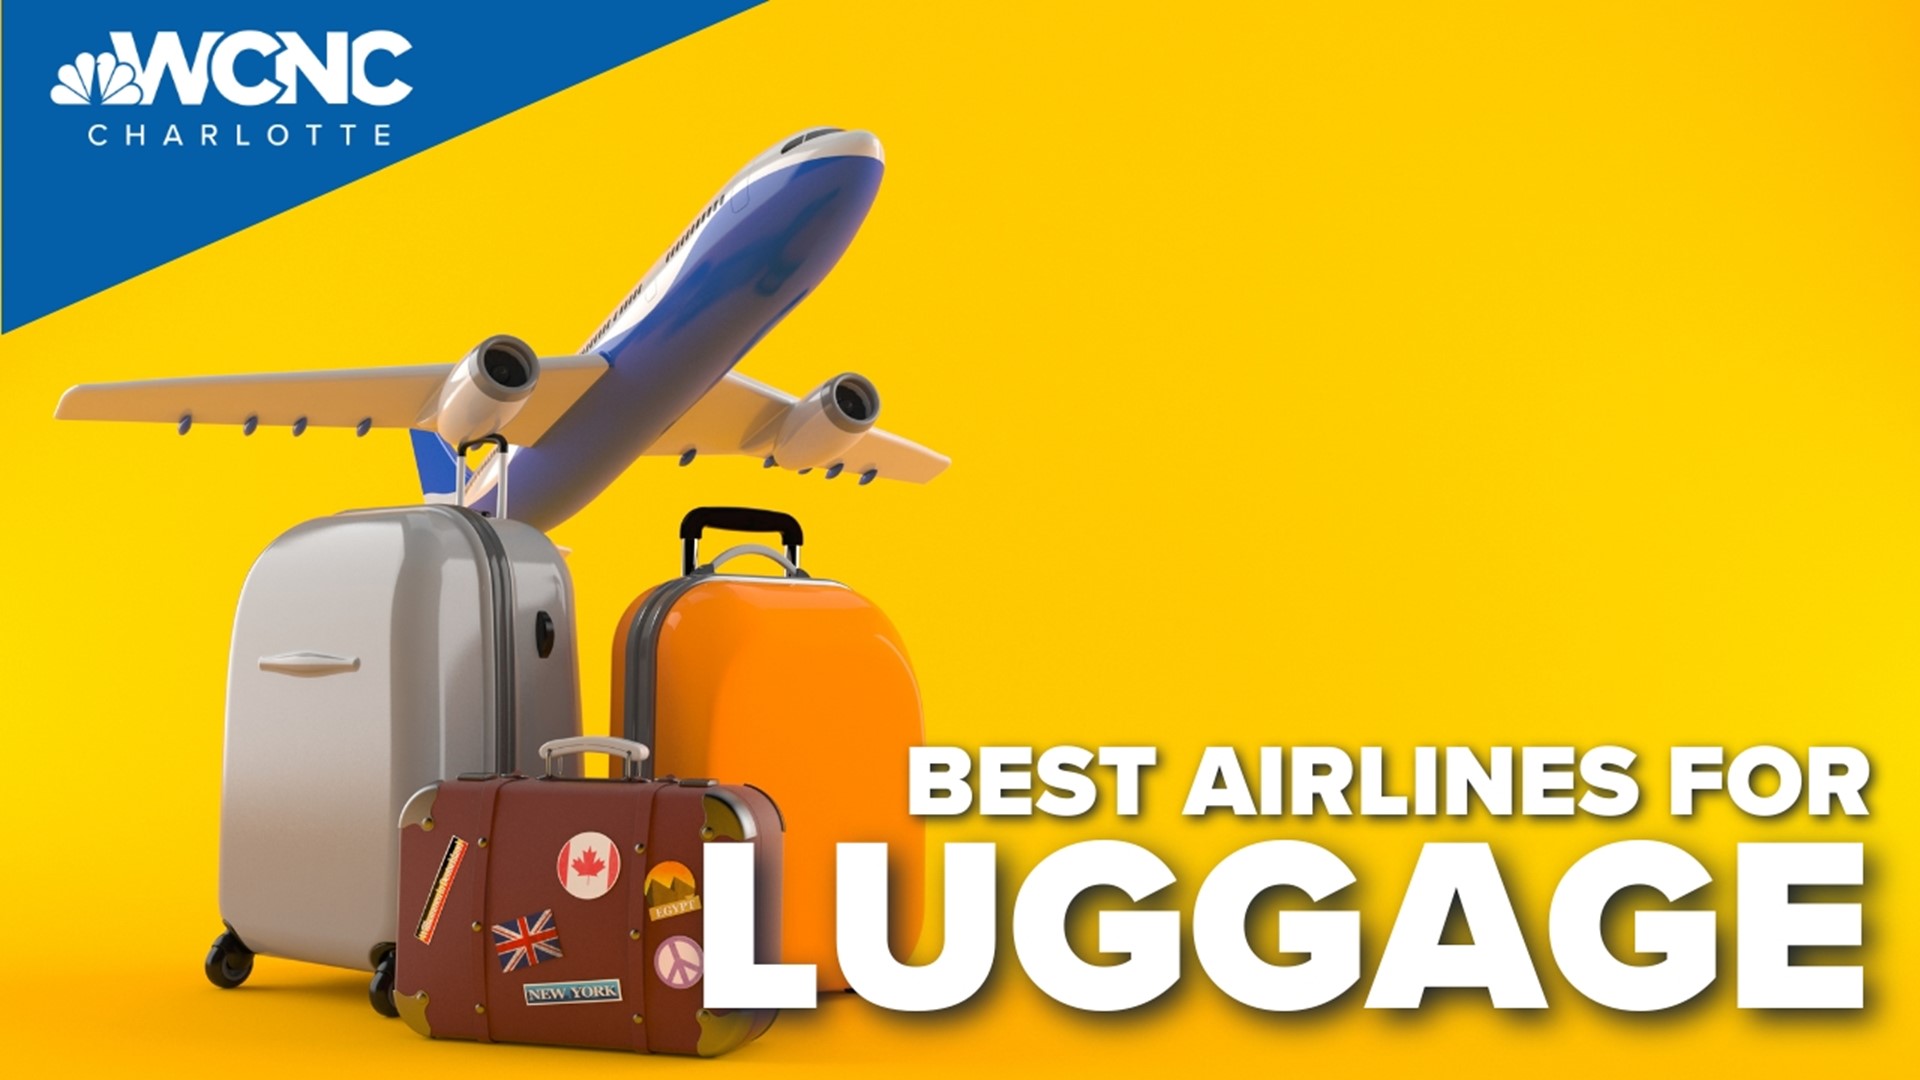 Not all airlines are created equal when it comes to baggage.